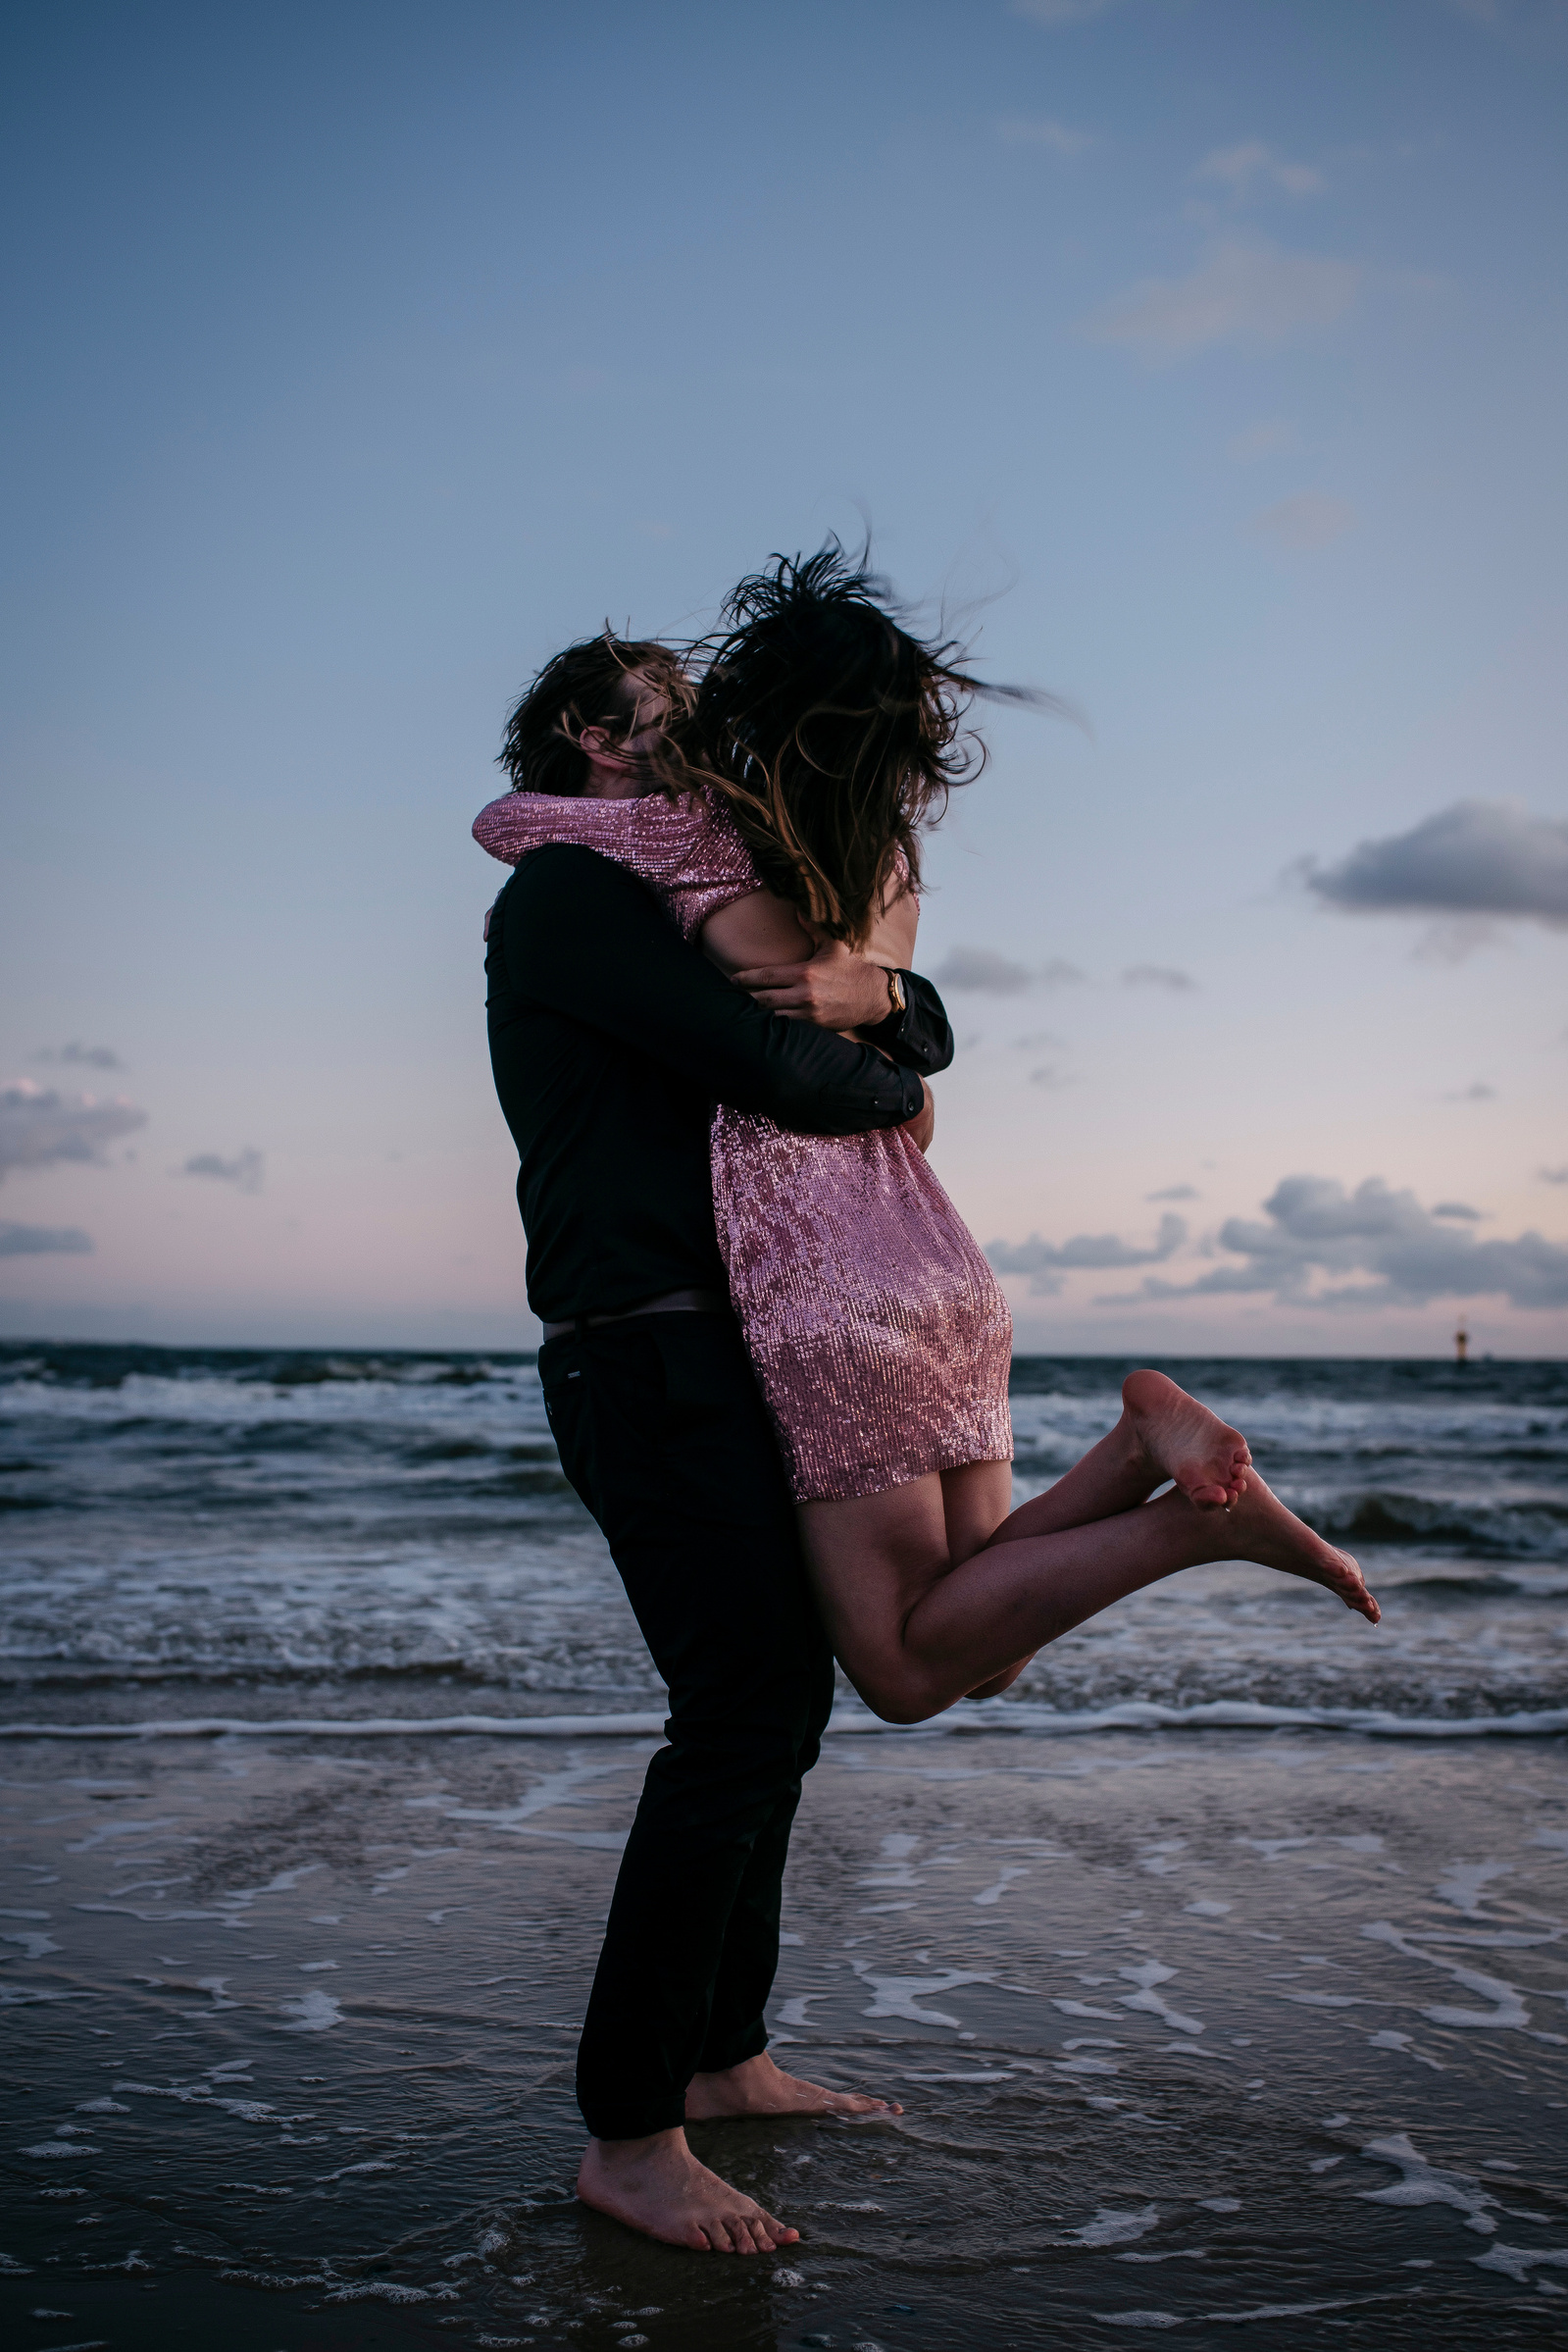 A woman jumping into the arms of her partner on the shore, with the sea in the background.